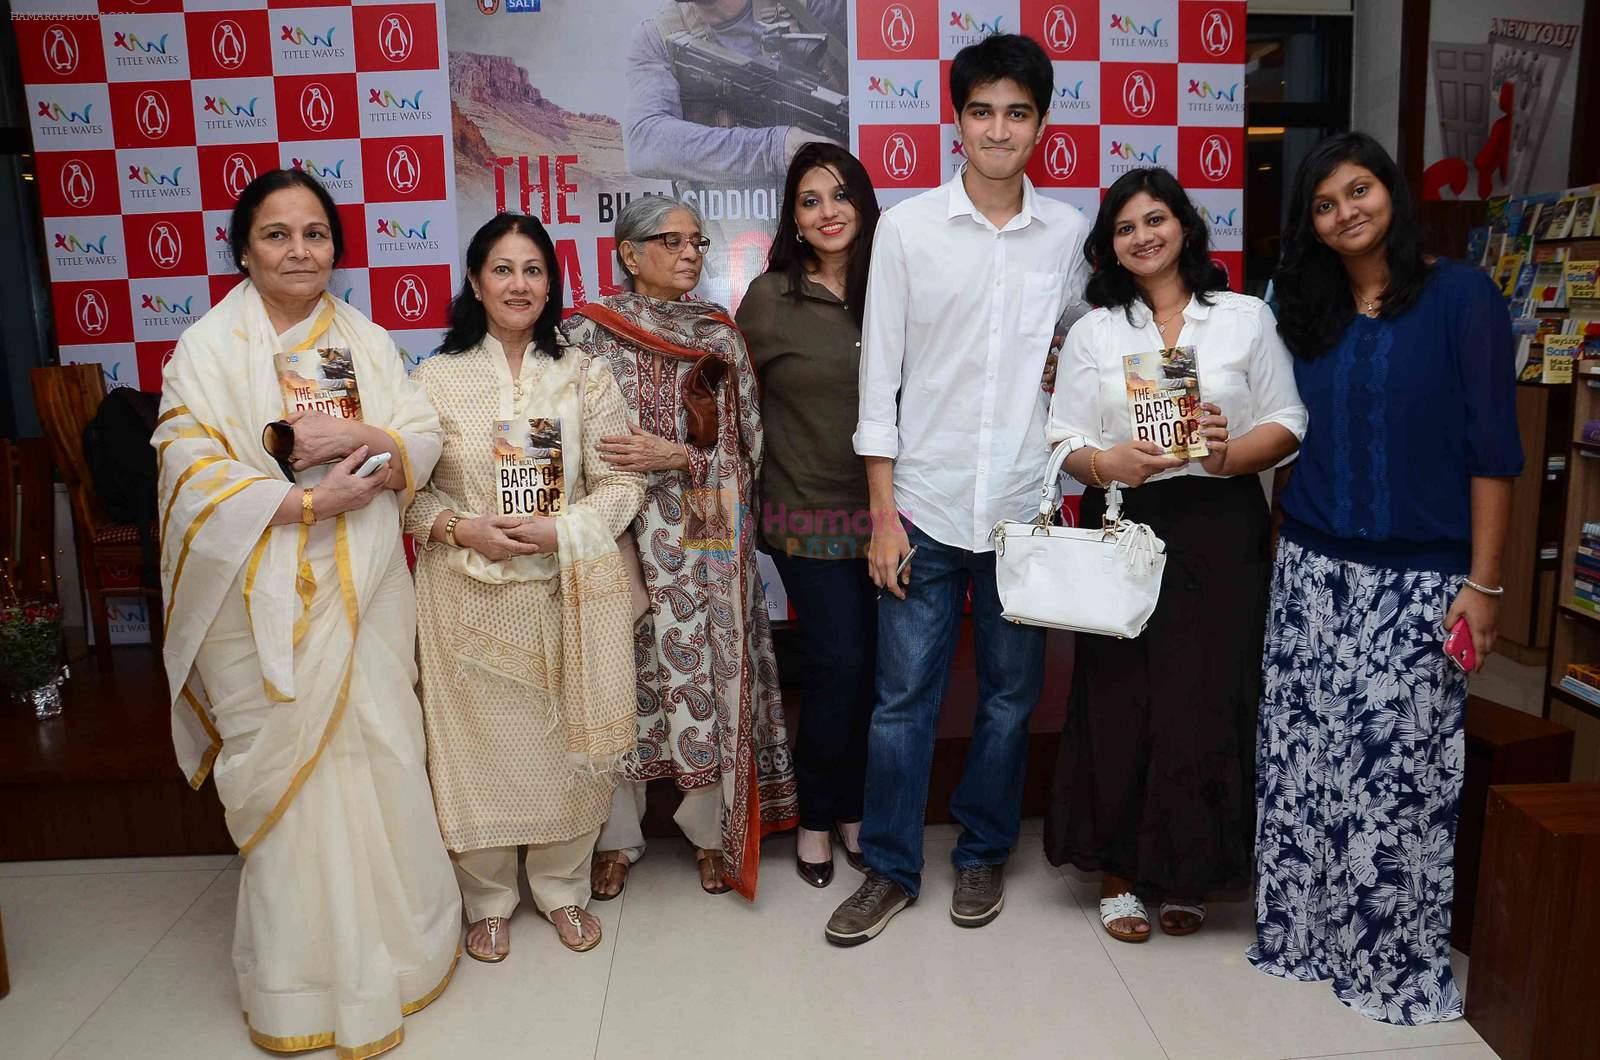 at Bilal Siddiqui's book launch on 4th May 2015